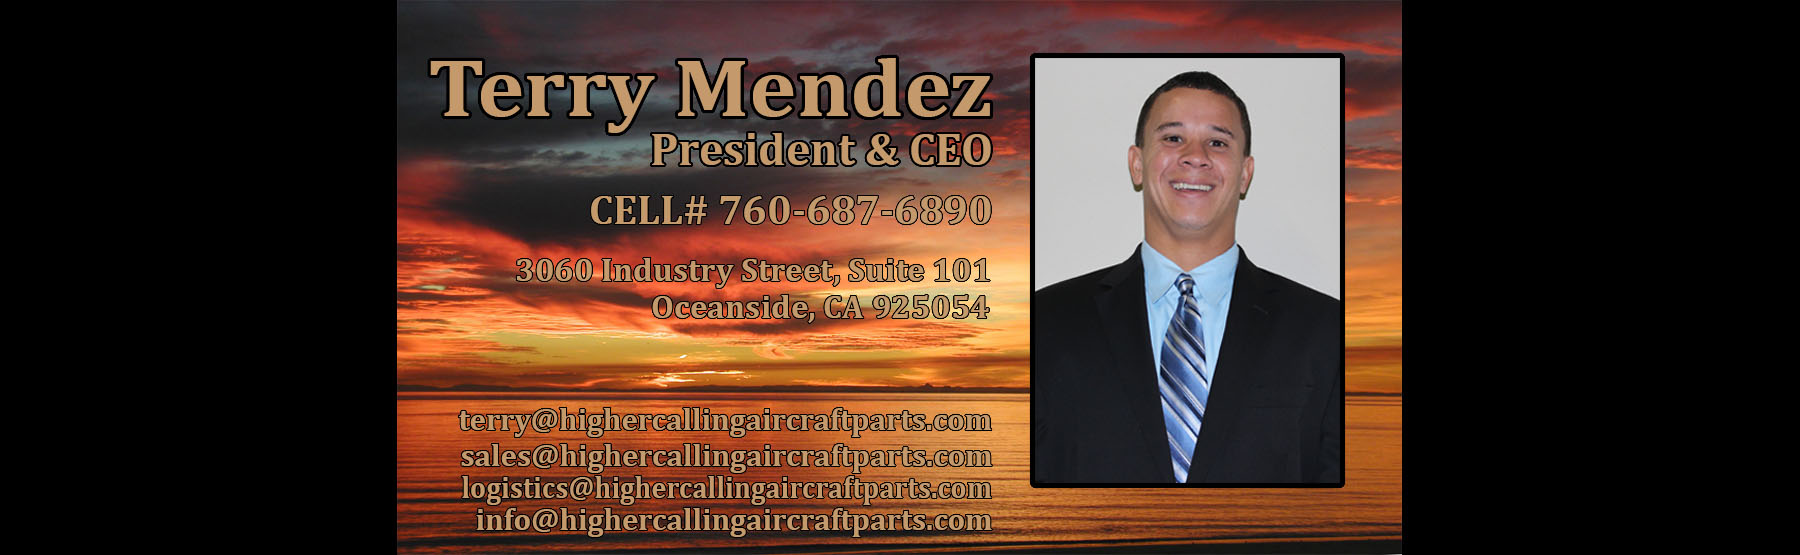 Owner Terry Mendez Business card with photo